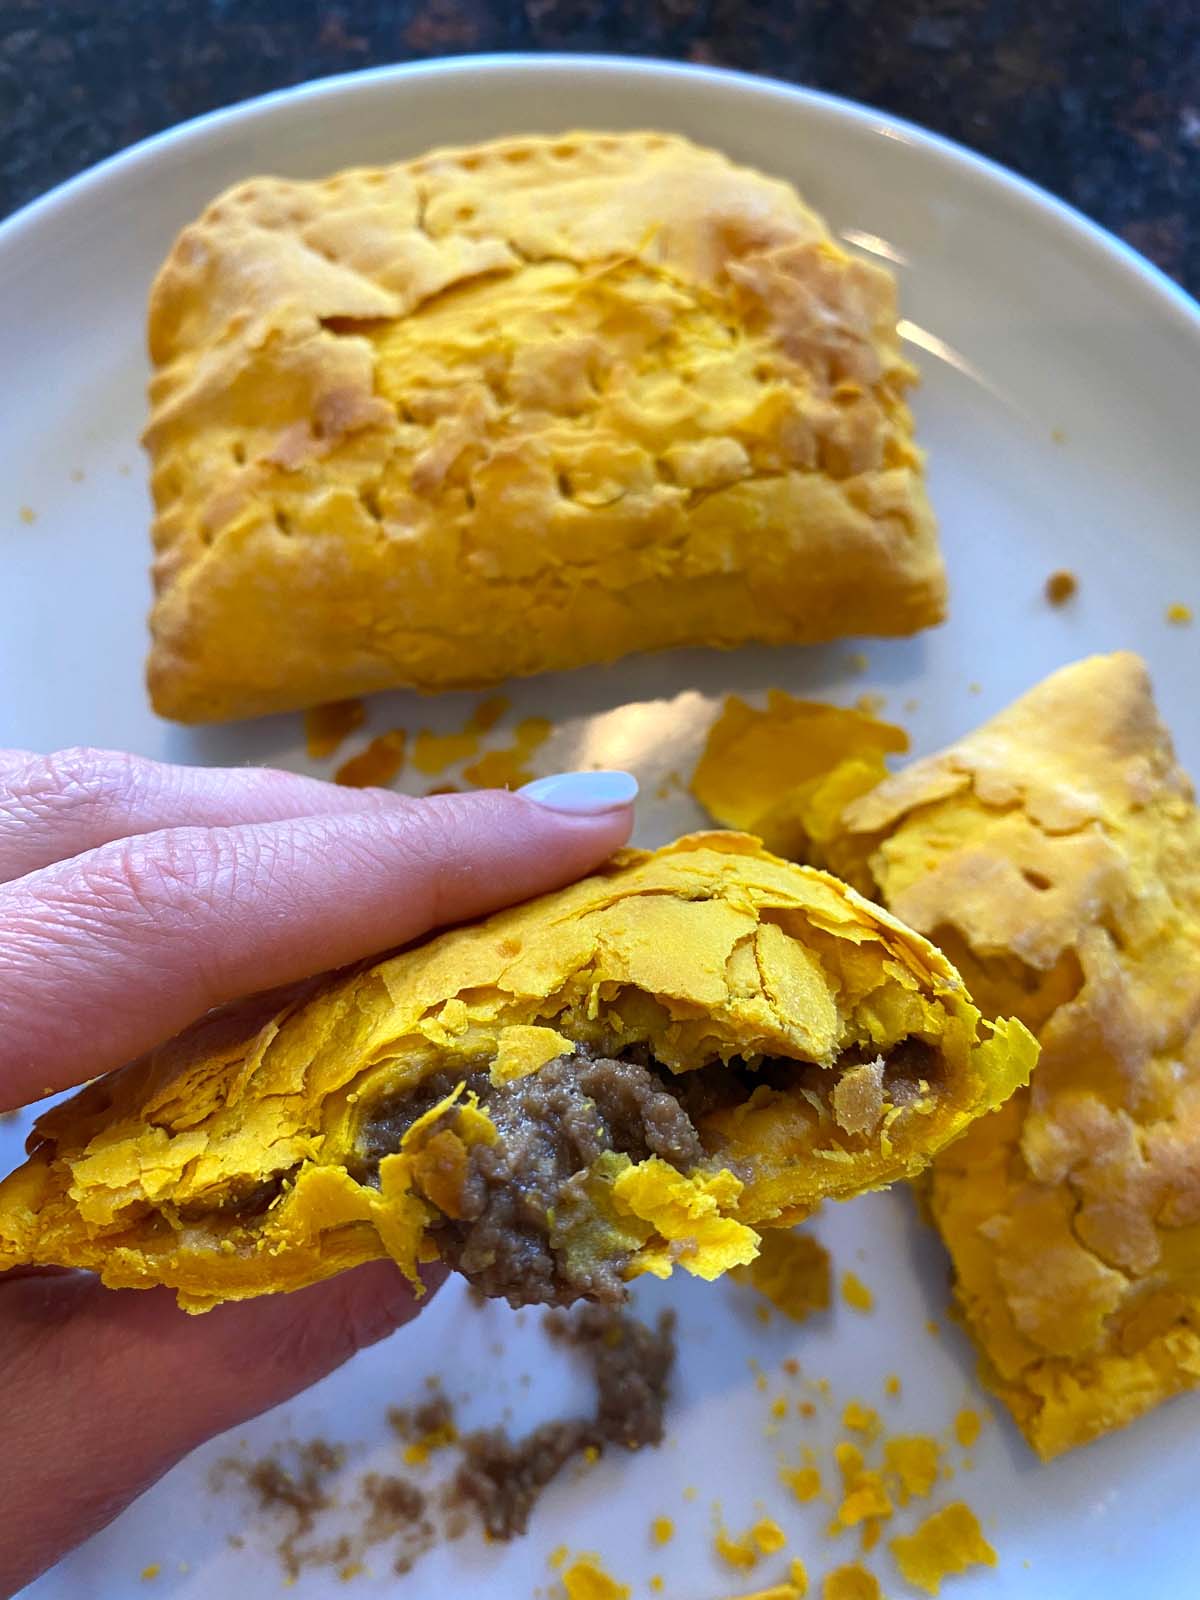 How To Cook A Frozen Jamaican Beef Patty in Air Fryer — Jazz Leaf